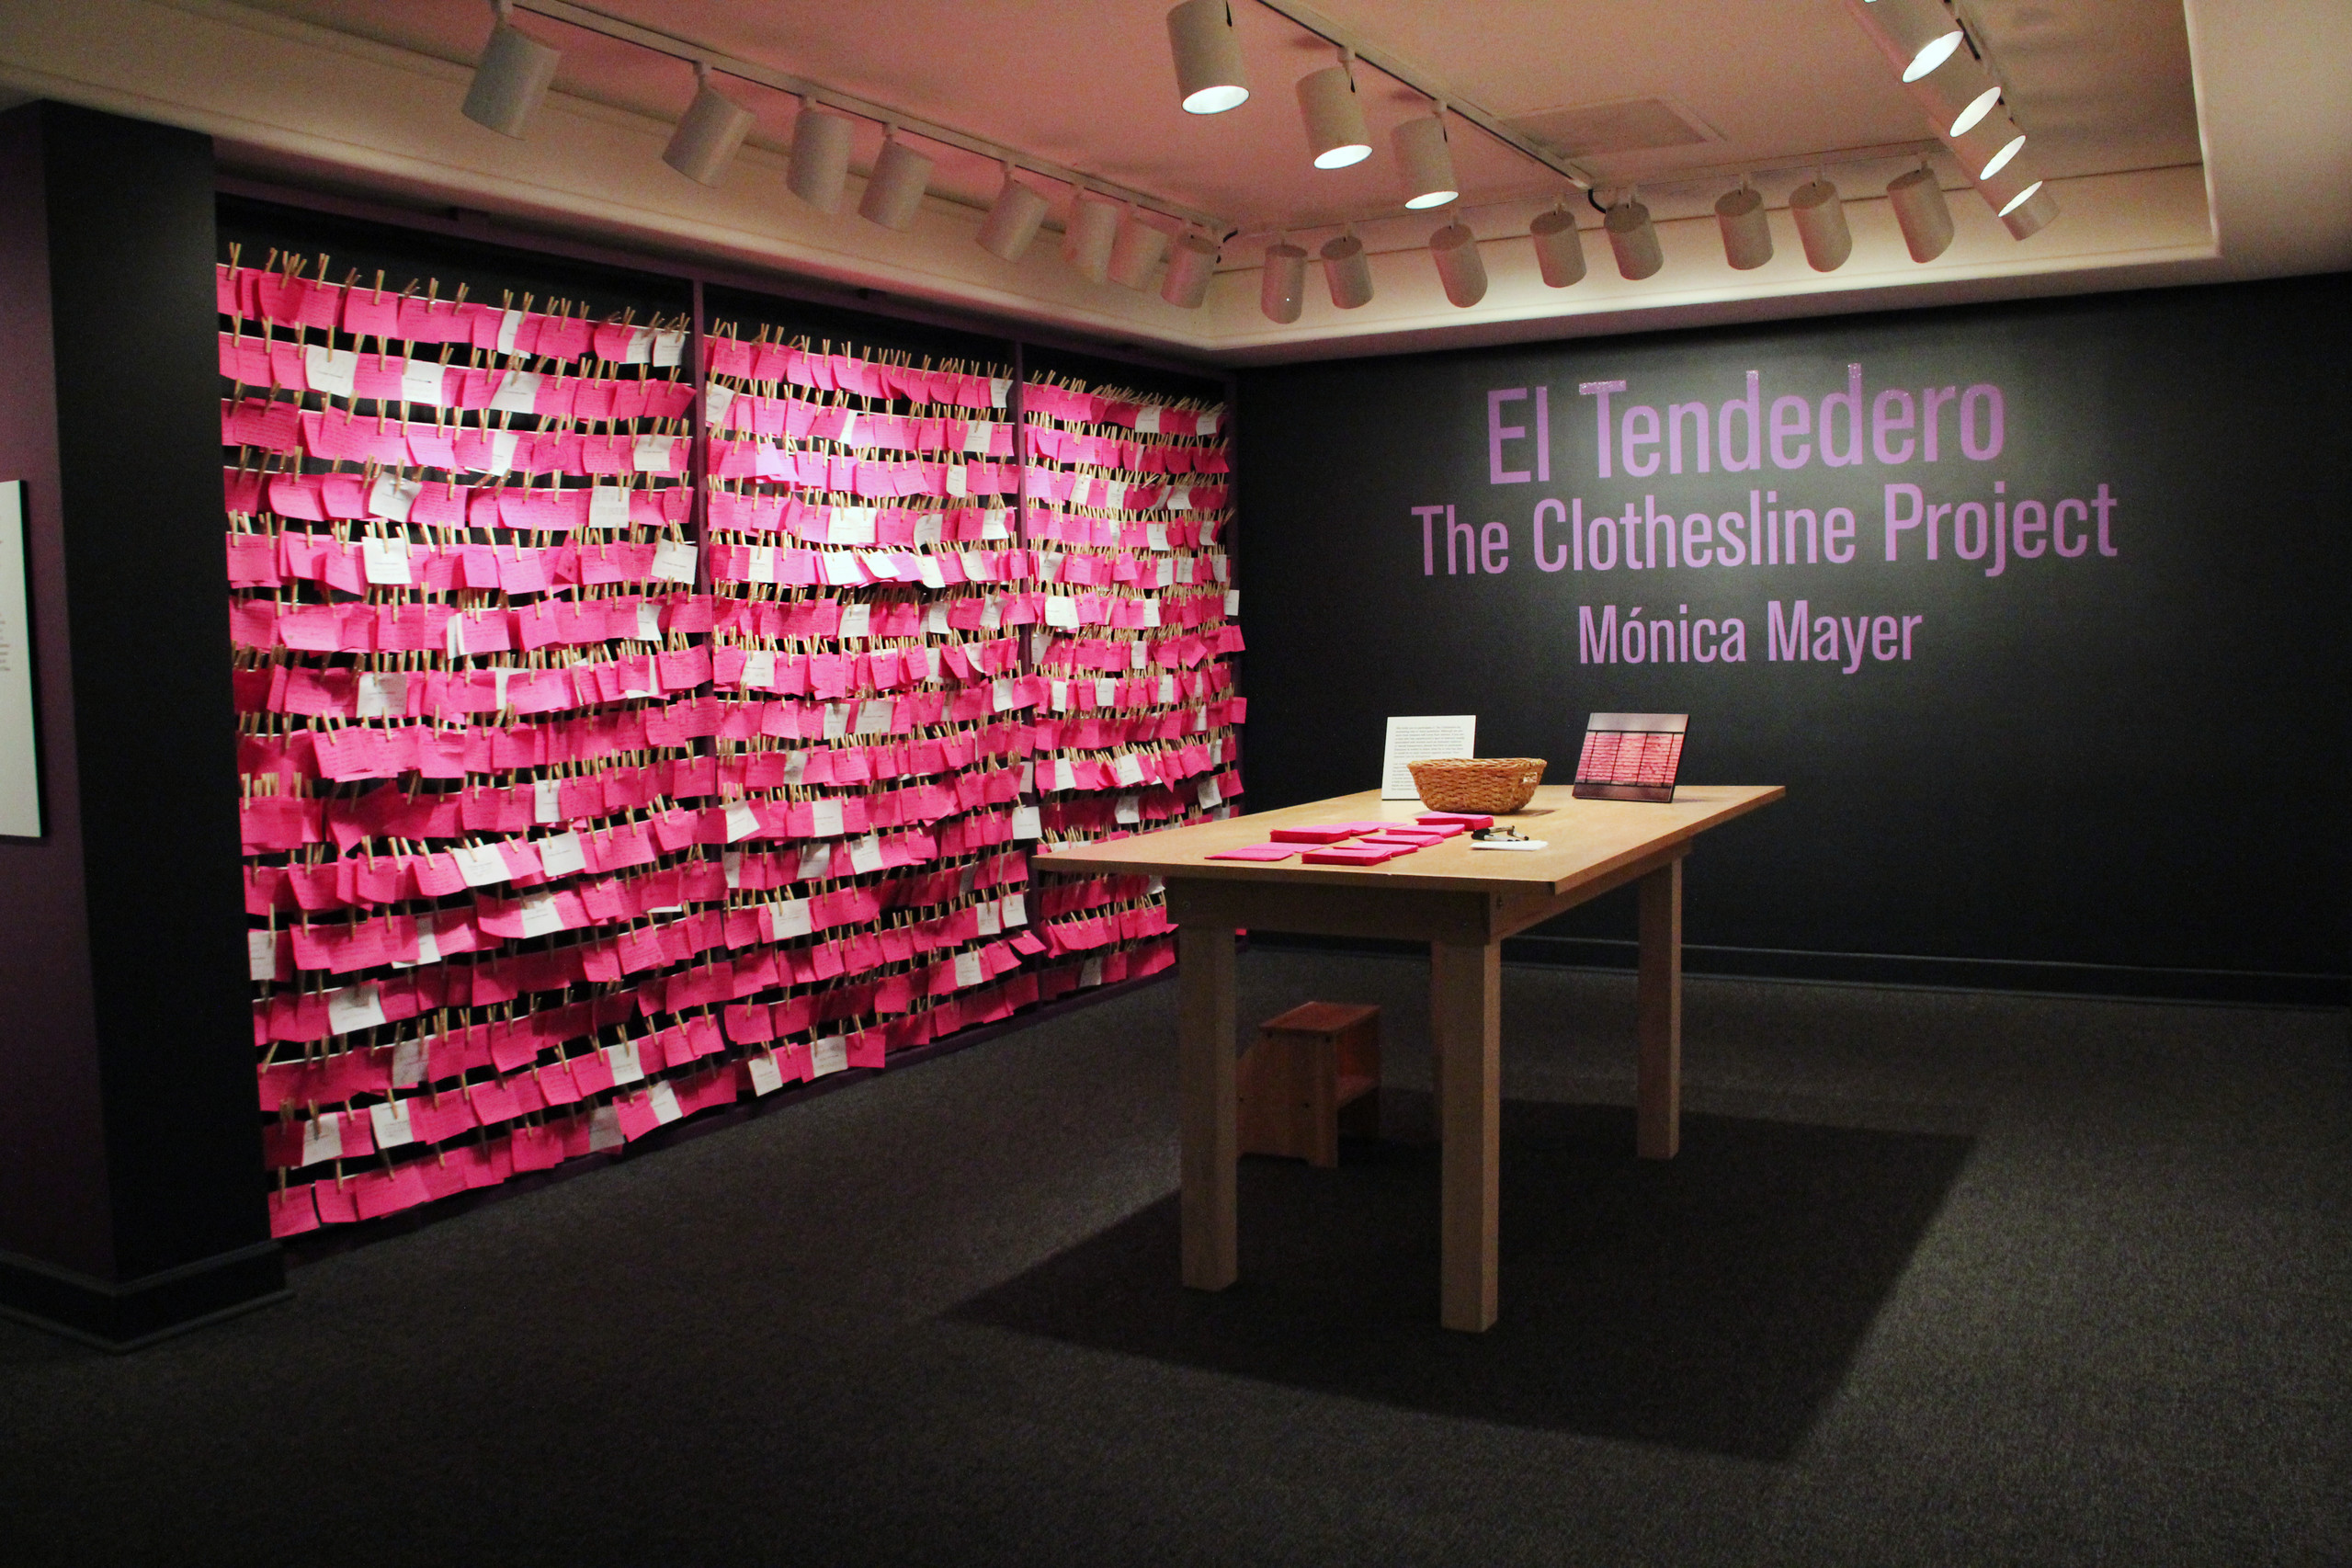 View of exhibition gallery features bright pink post-it notes line the wall from ceiling to floor. On the adjacent wall are the words in pink text: